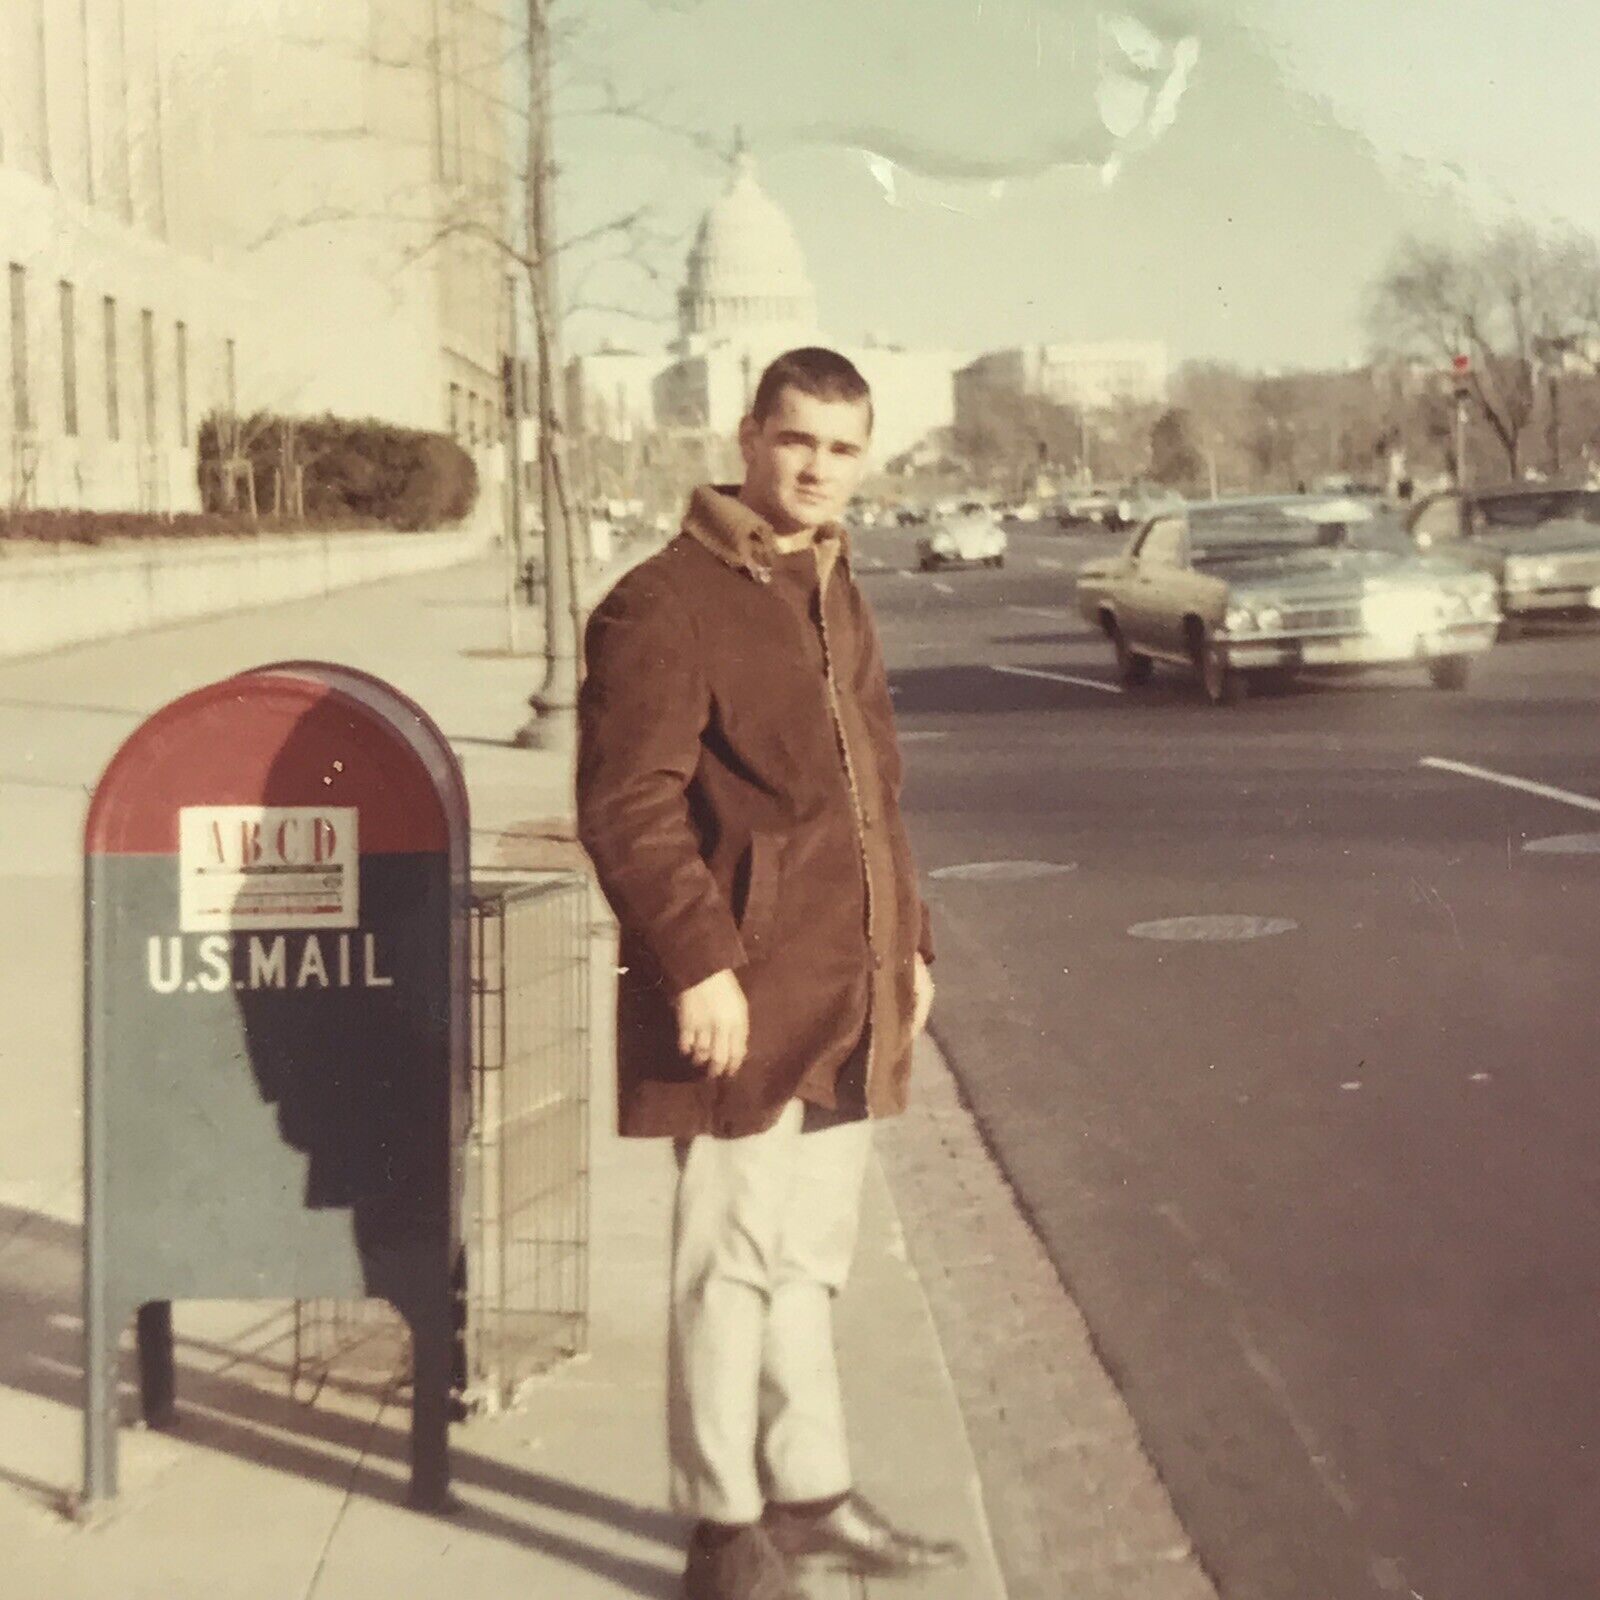 Vintage 1968 Color Photo Young Man Sidewalk US Mail Postbox Mailbox Street Cars